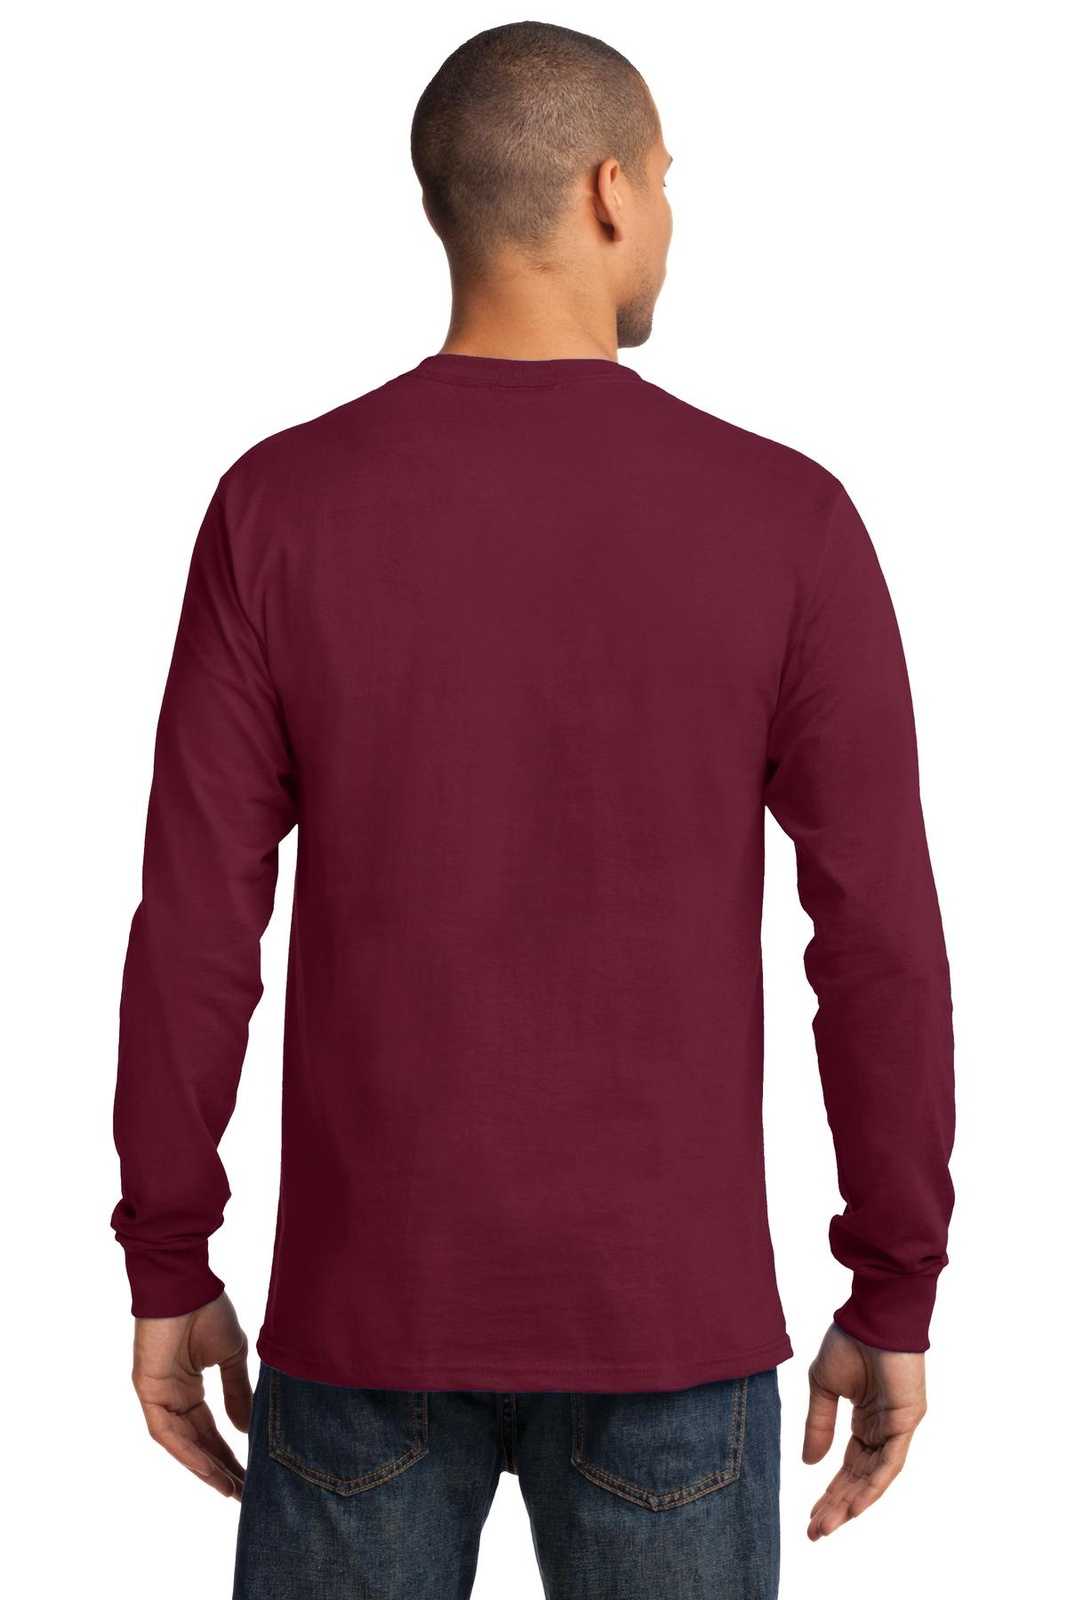 Port & Company PC61LS Long Sleeve Essential Tee - Cardinal - HIT a Double - 1